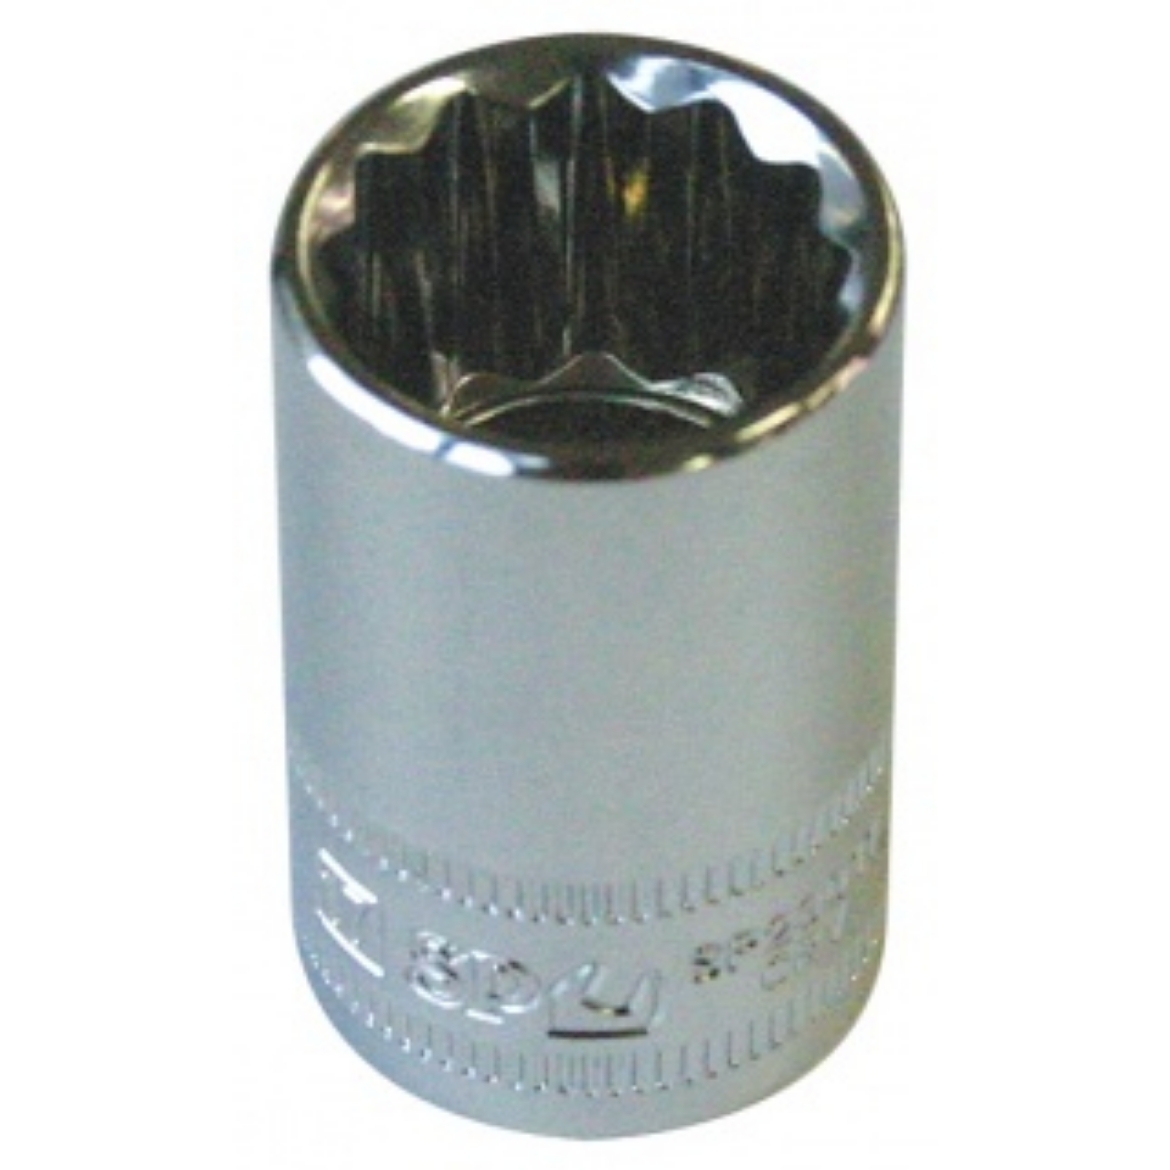 Picture of SOCKET 1/2"DR 12PT METRIC 26MM SP TOOLS